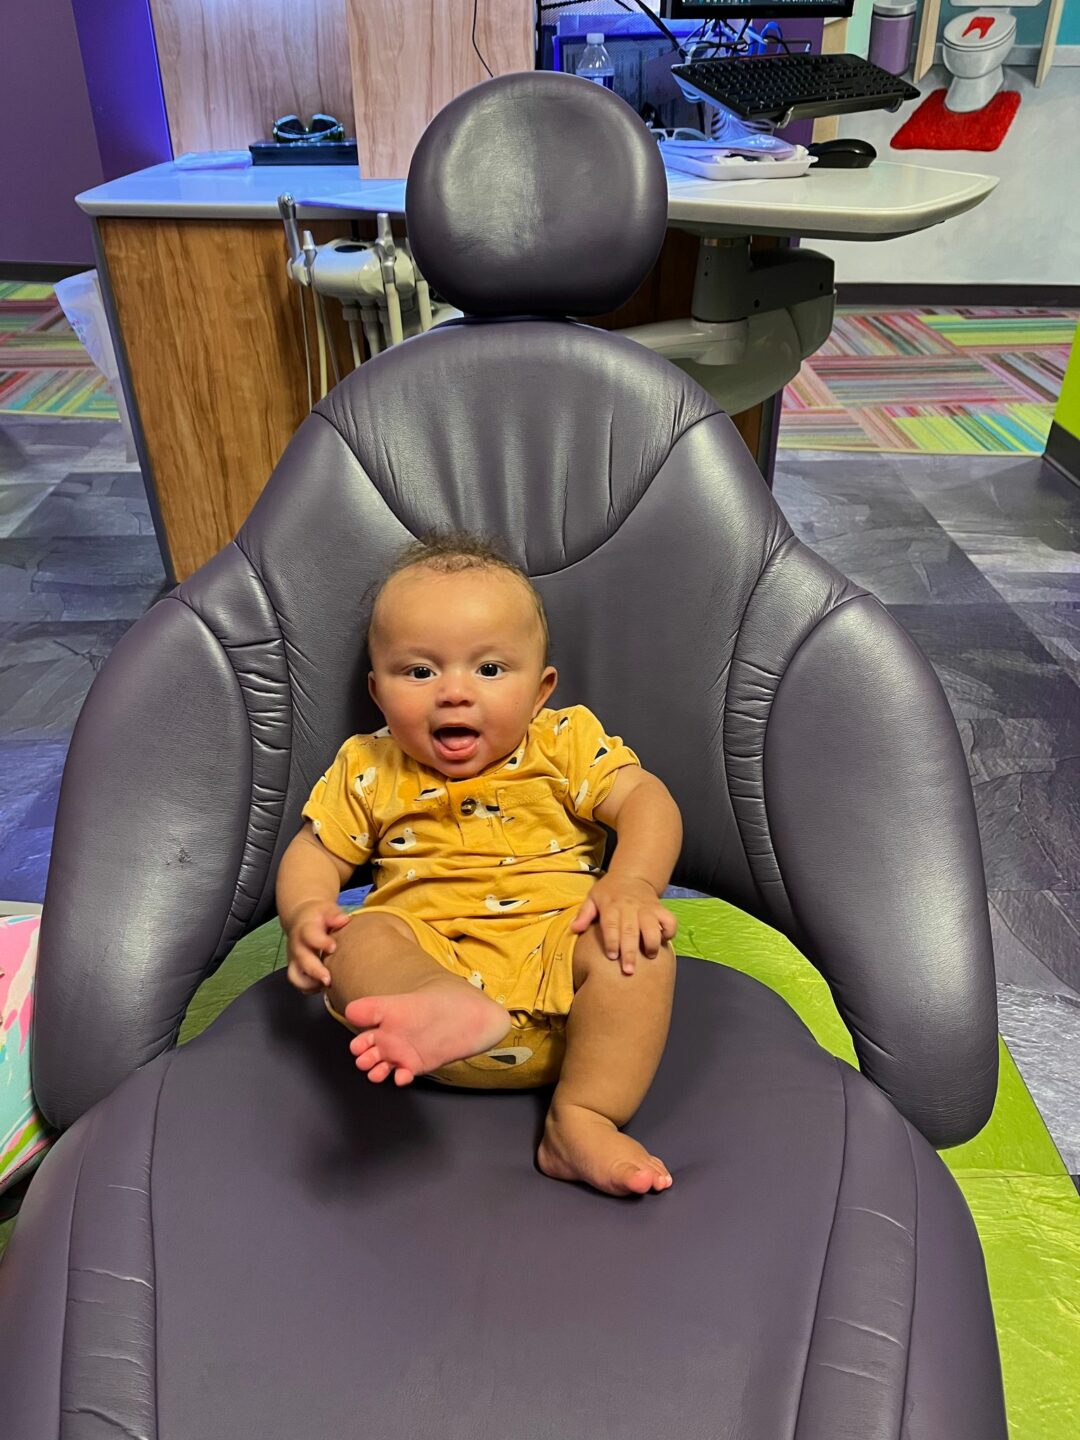 Image of happy infant sitting in dental chair at the dentist’s office.